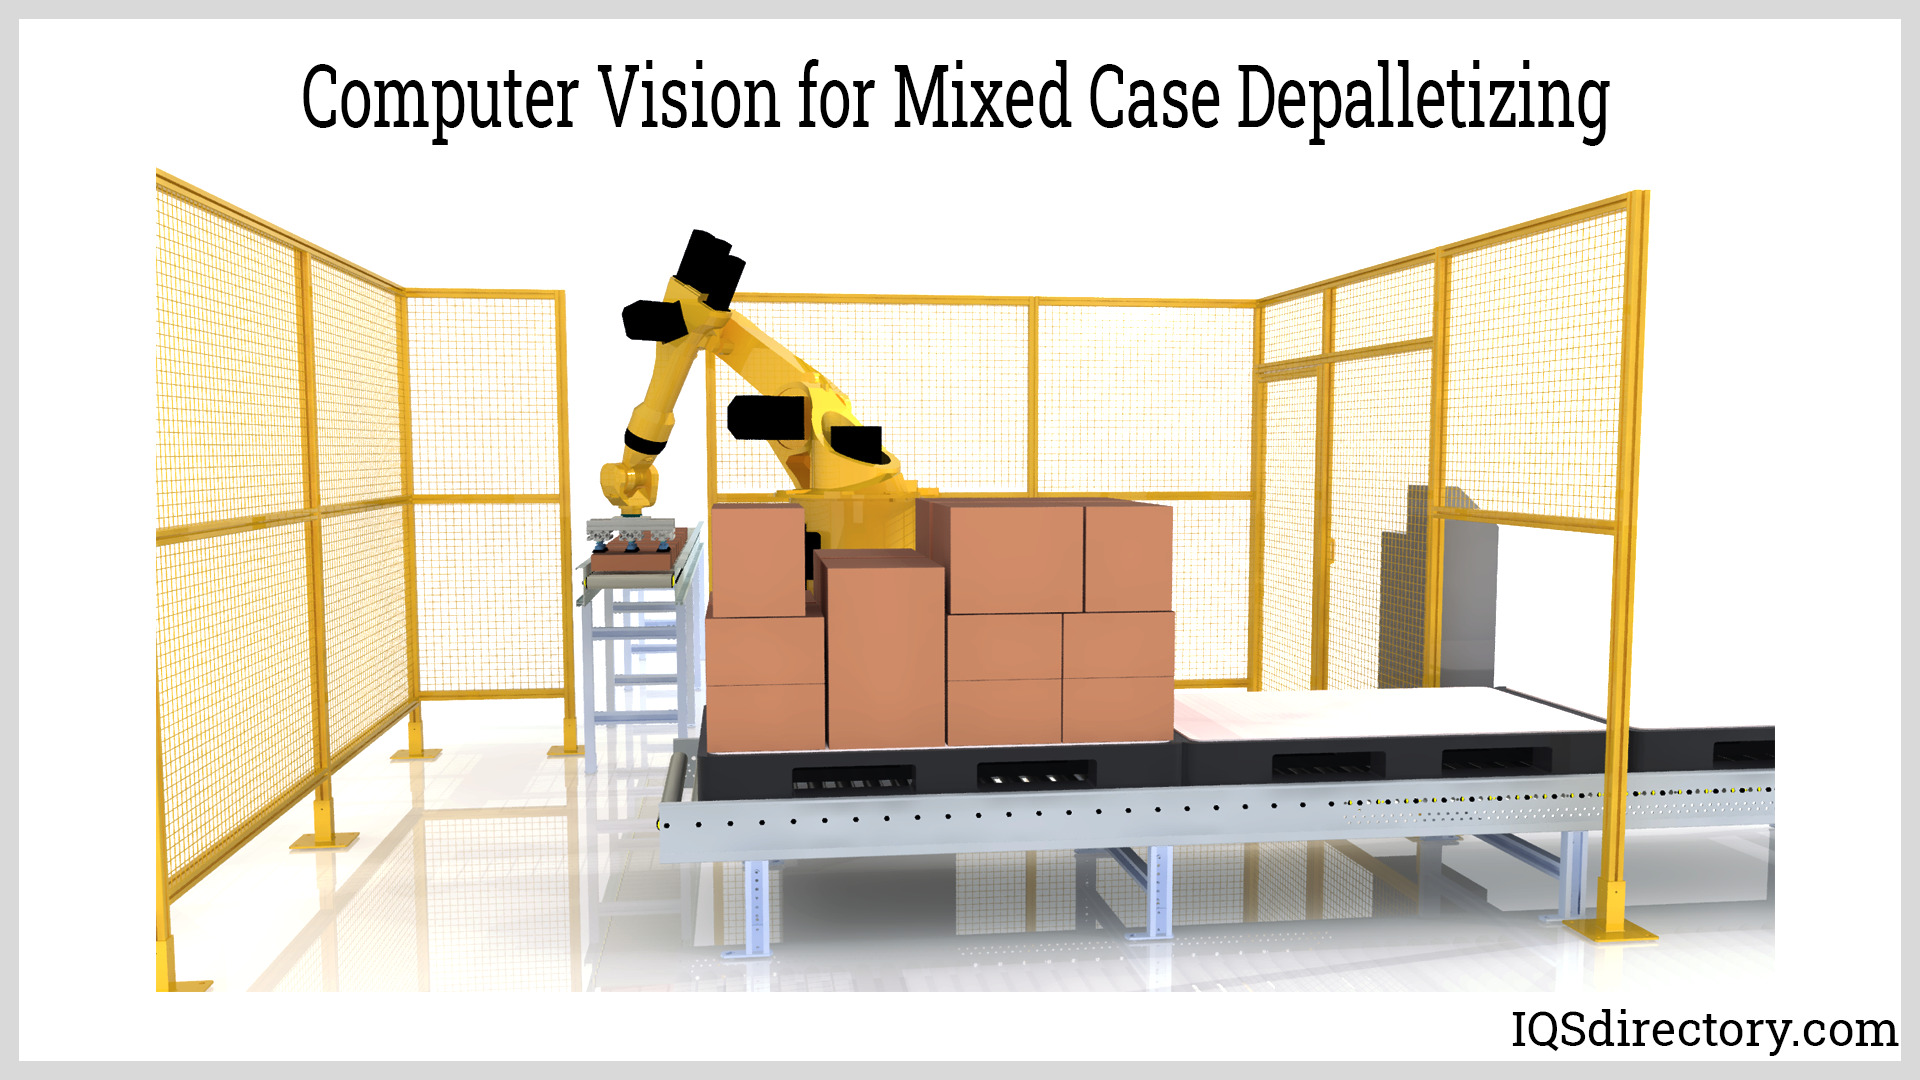 Computer Vision for Mixed Case Depalletizing